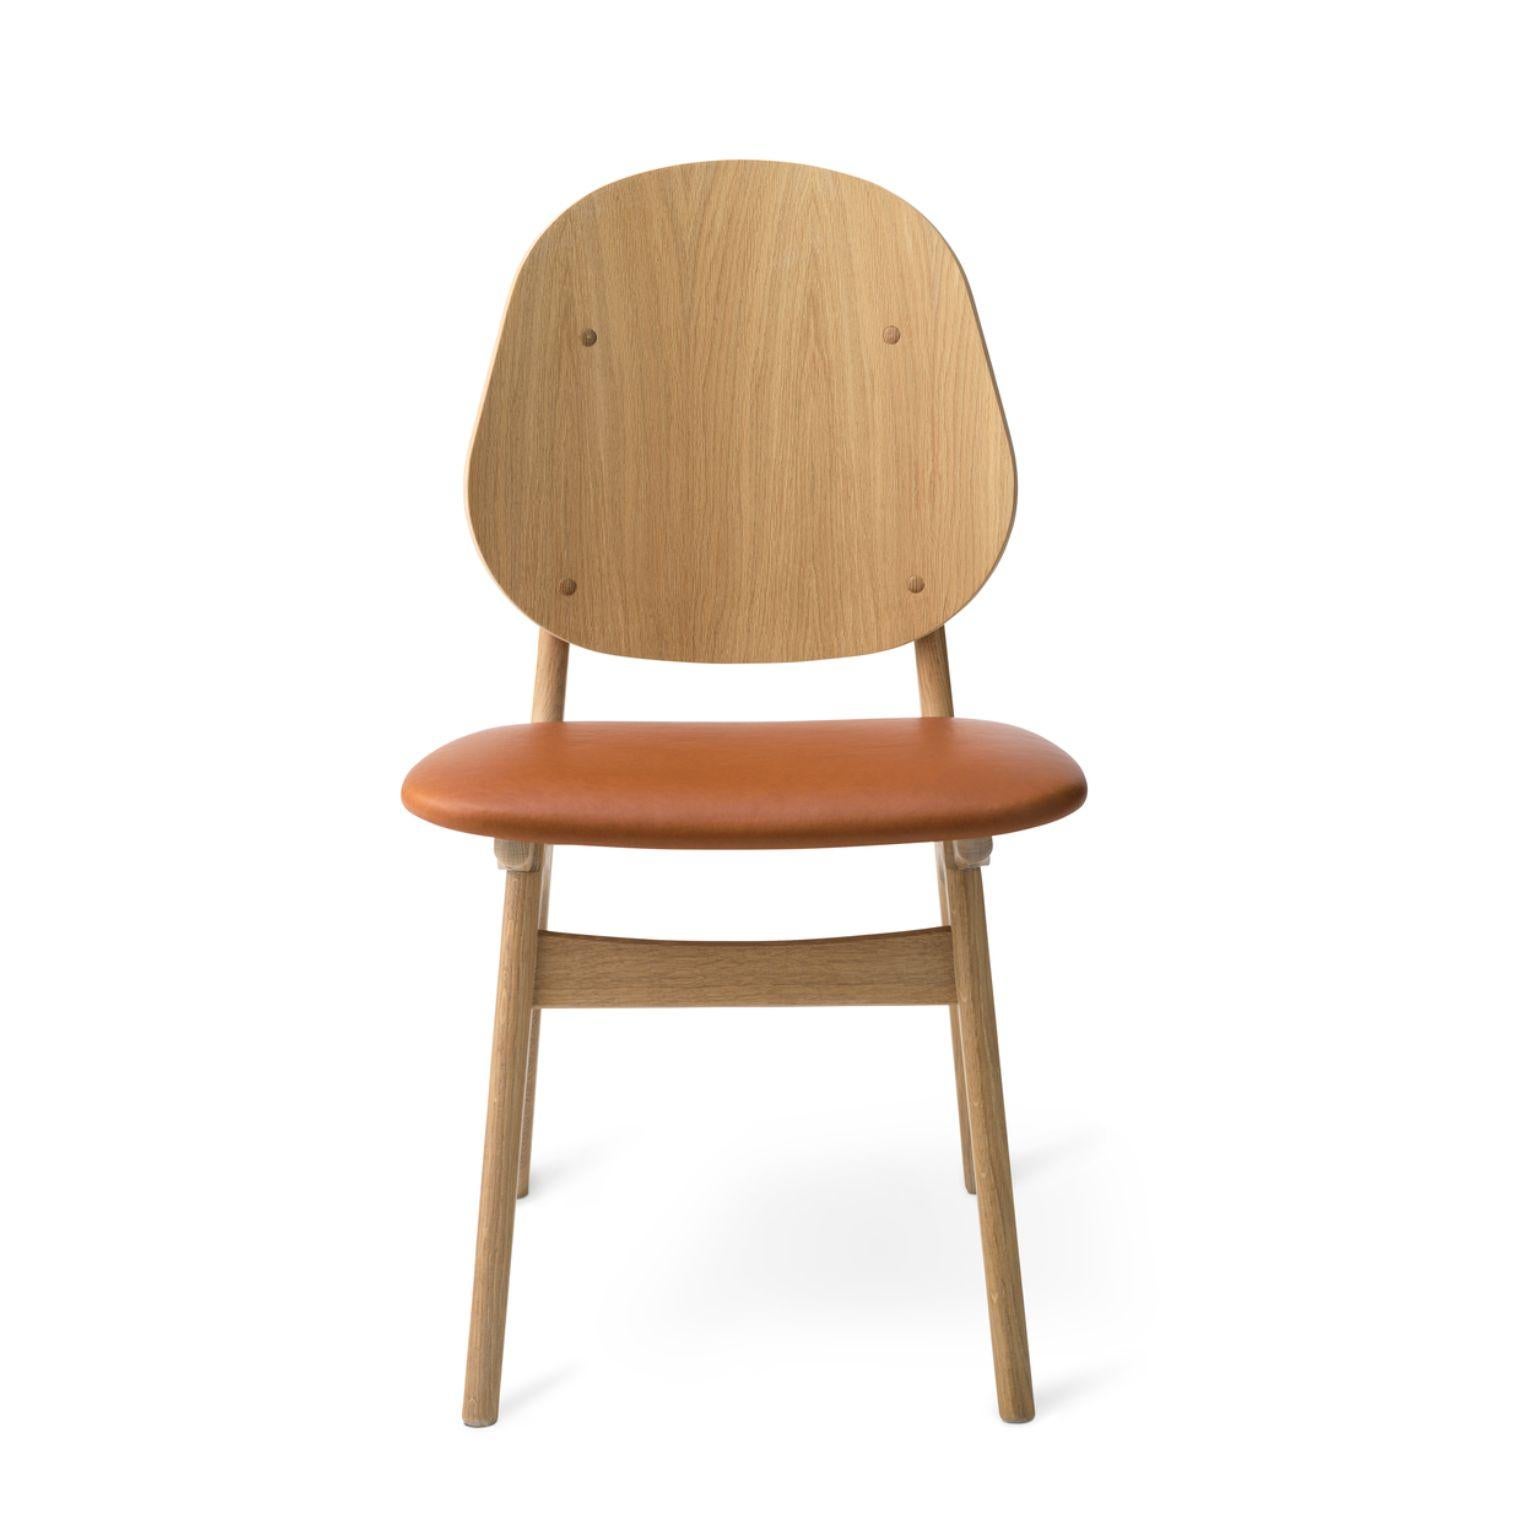 Noble chair White Oiled Oak Camel by Warm Nordic
Dimensions: D55 x W47 x H 85 cm
Material: White oiled solid oak, Veneer seat and back, Textile or leather upholstery.
Weight: 7.5 kg
Also available in different colors and finishes. 

An elegant and